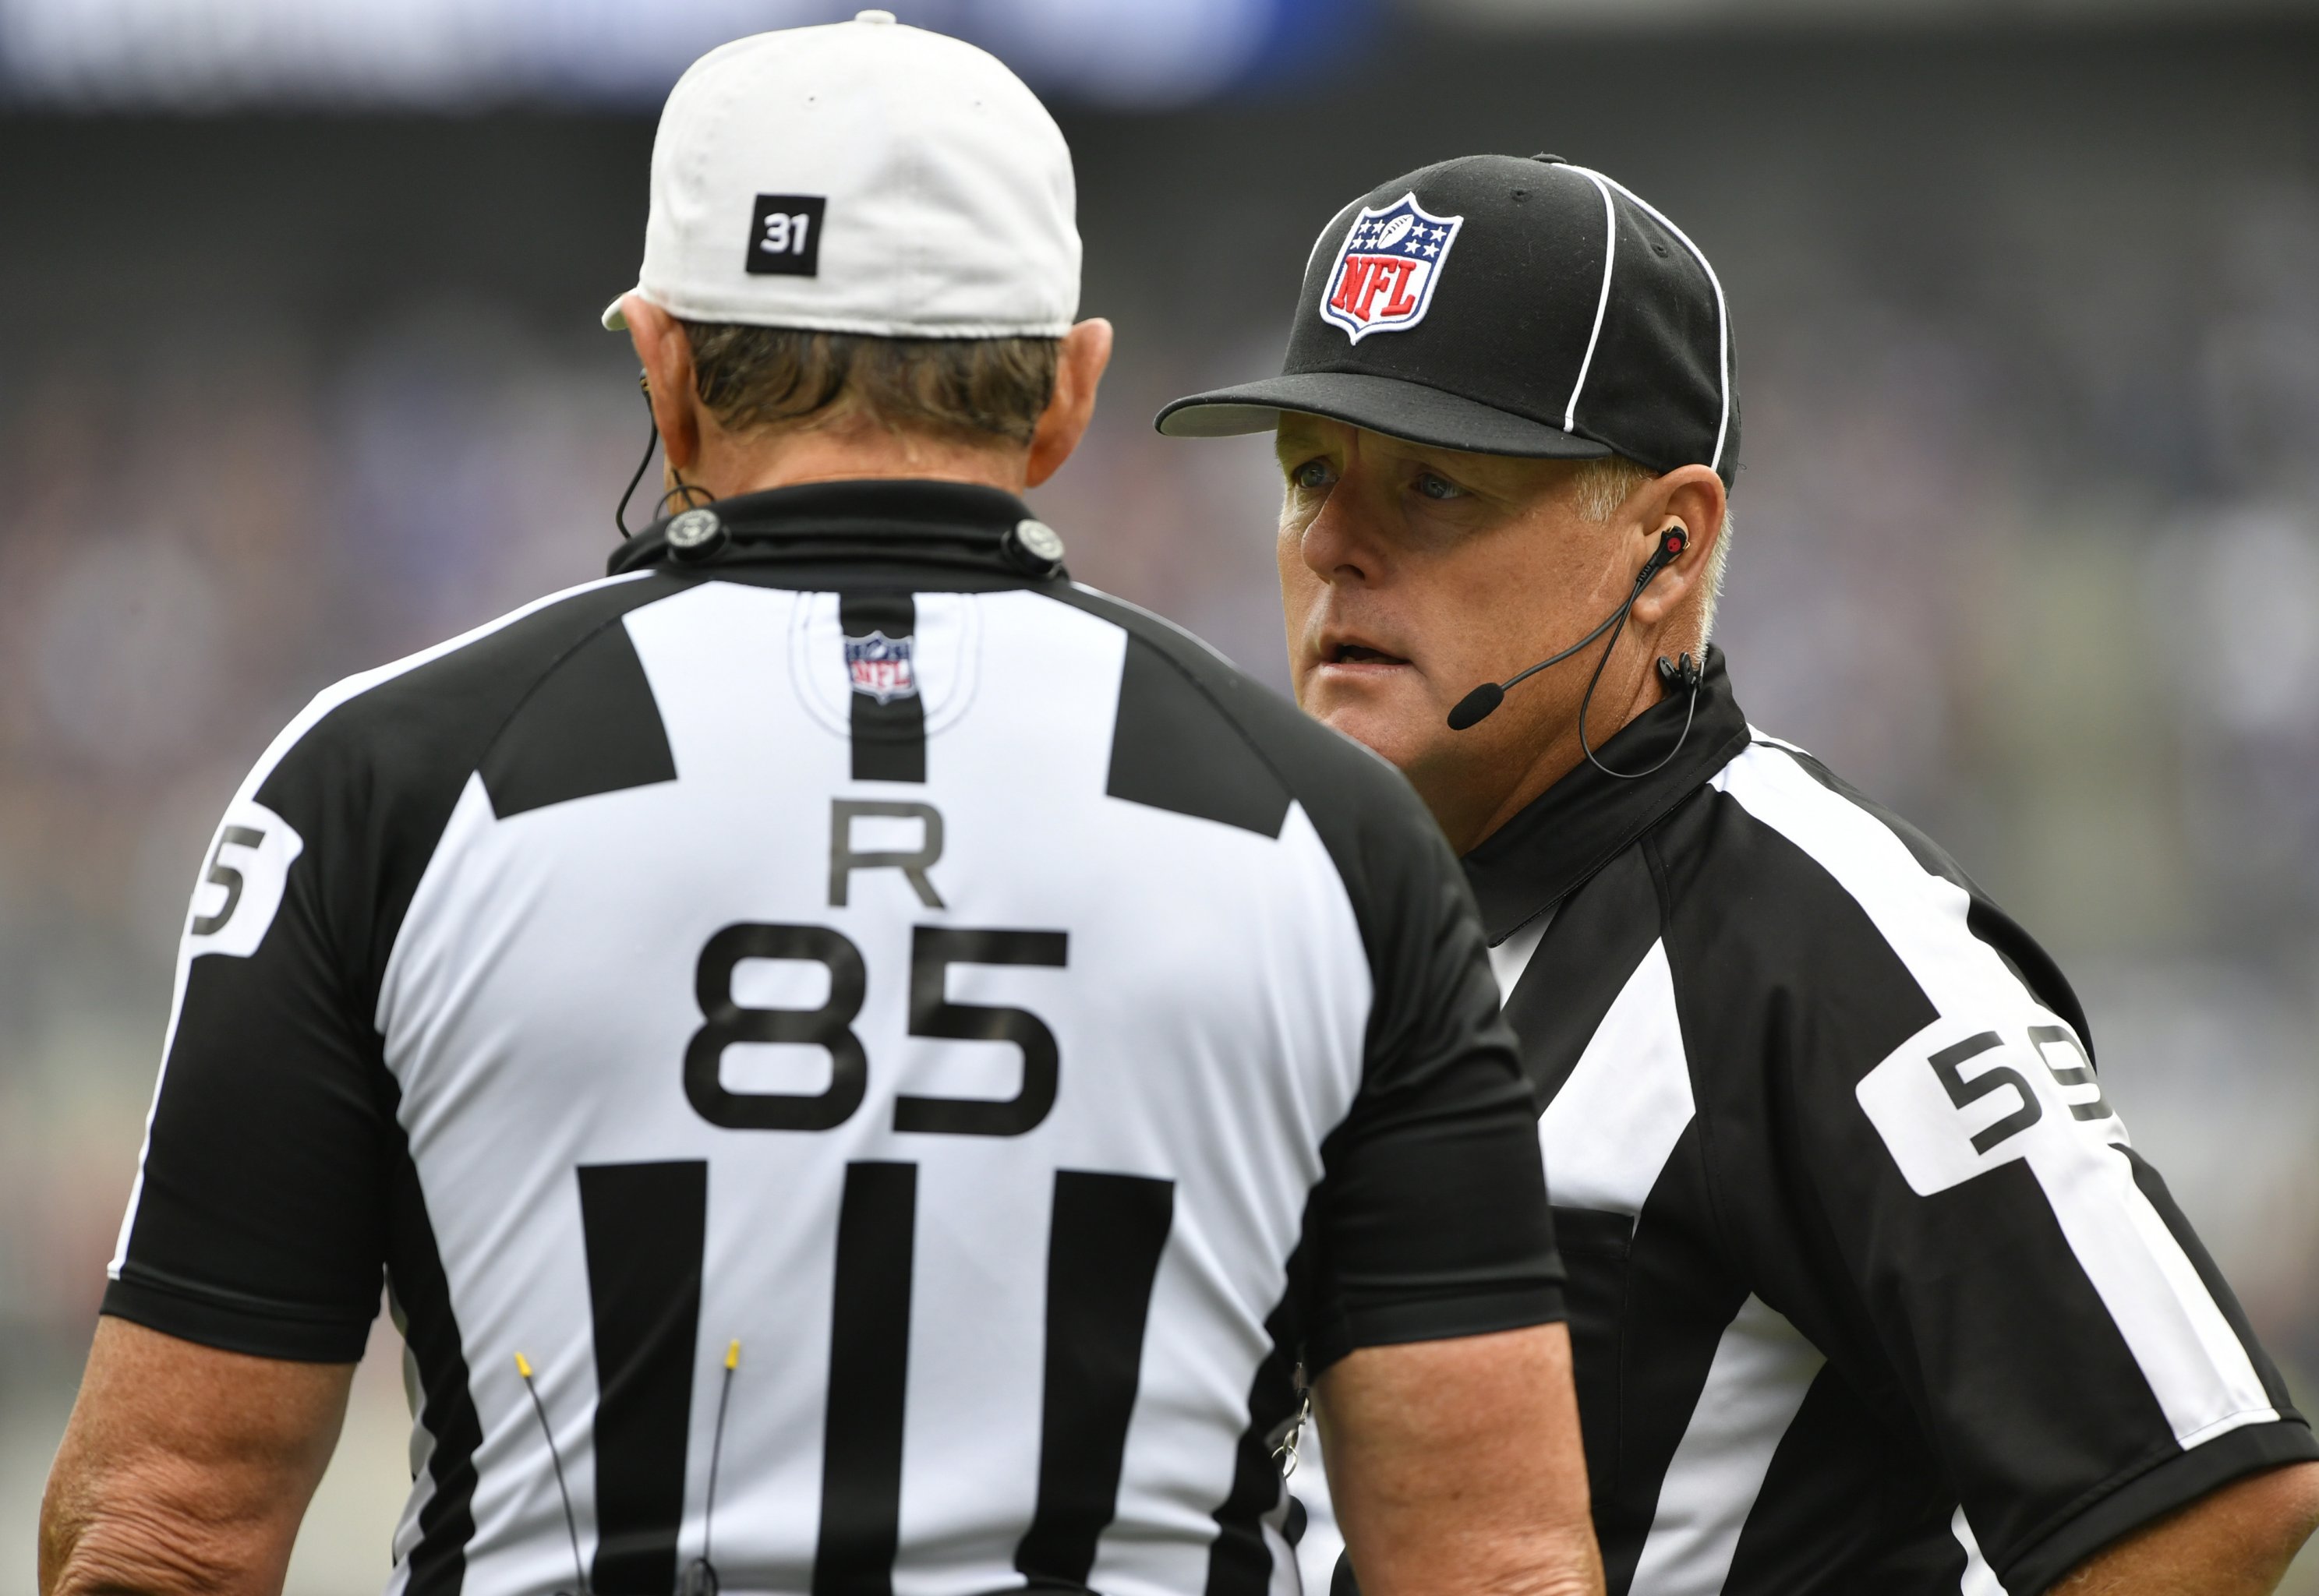 How Much Money Do Nfl Referees Make - How Much Money Do Nfl Referees